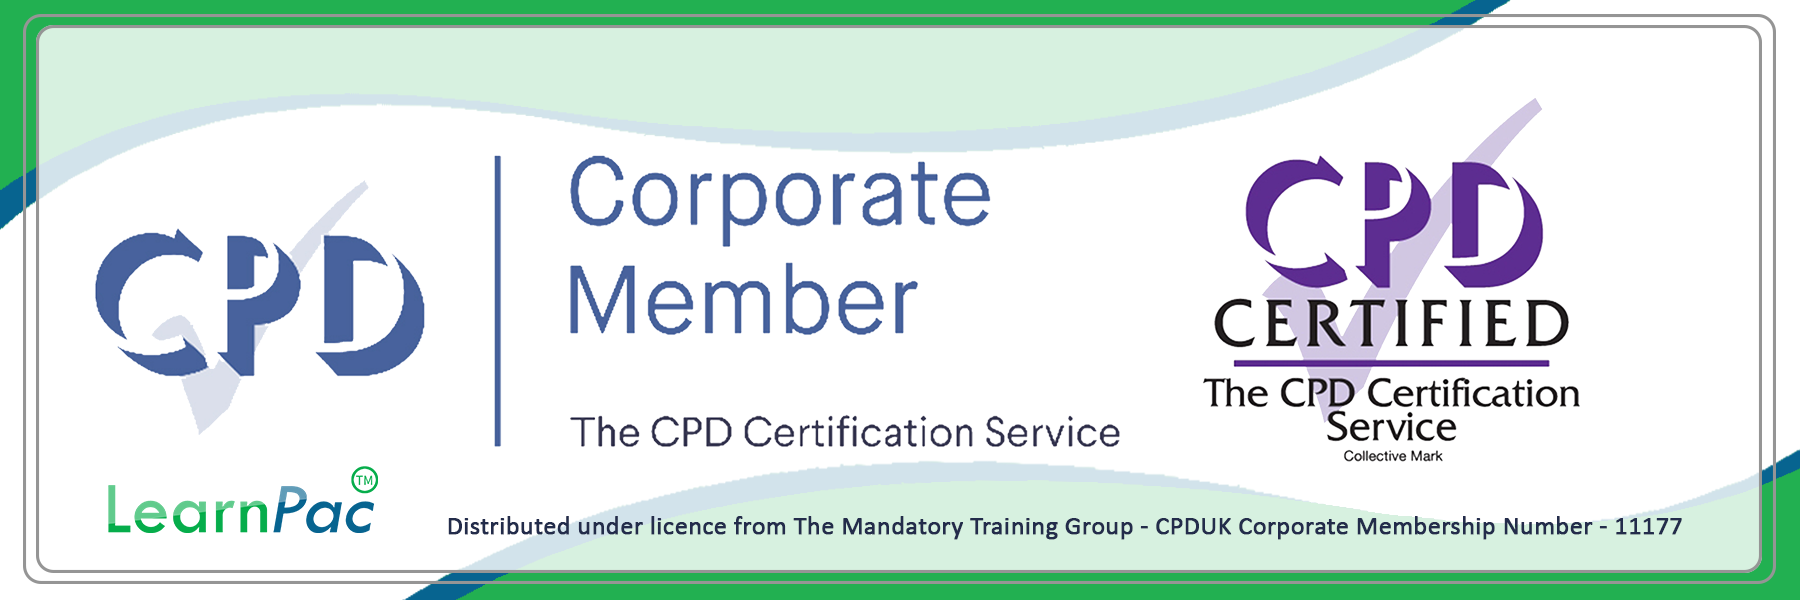 Clinical Governance Training Courses - E-Learning Courses with Certificates - CPD Certified - LearnPac Systems UK -